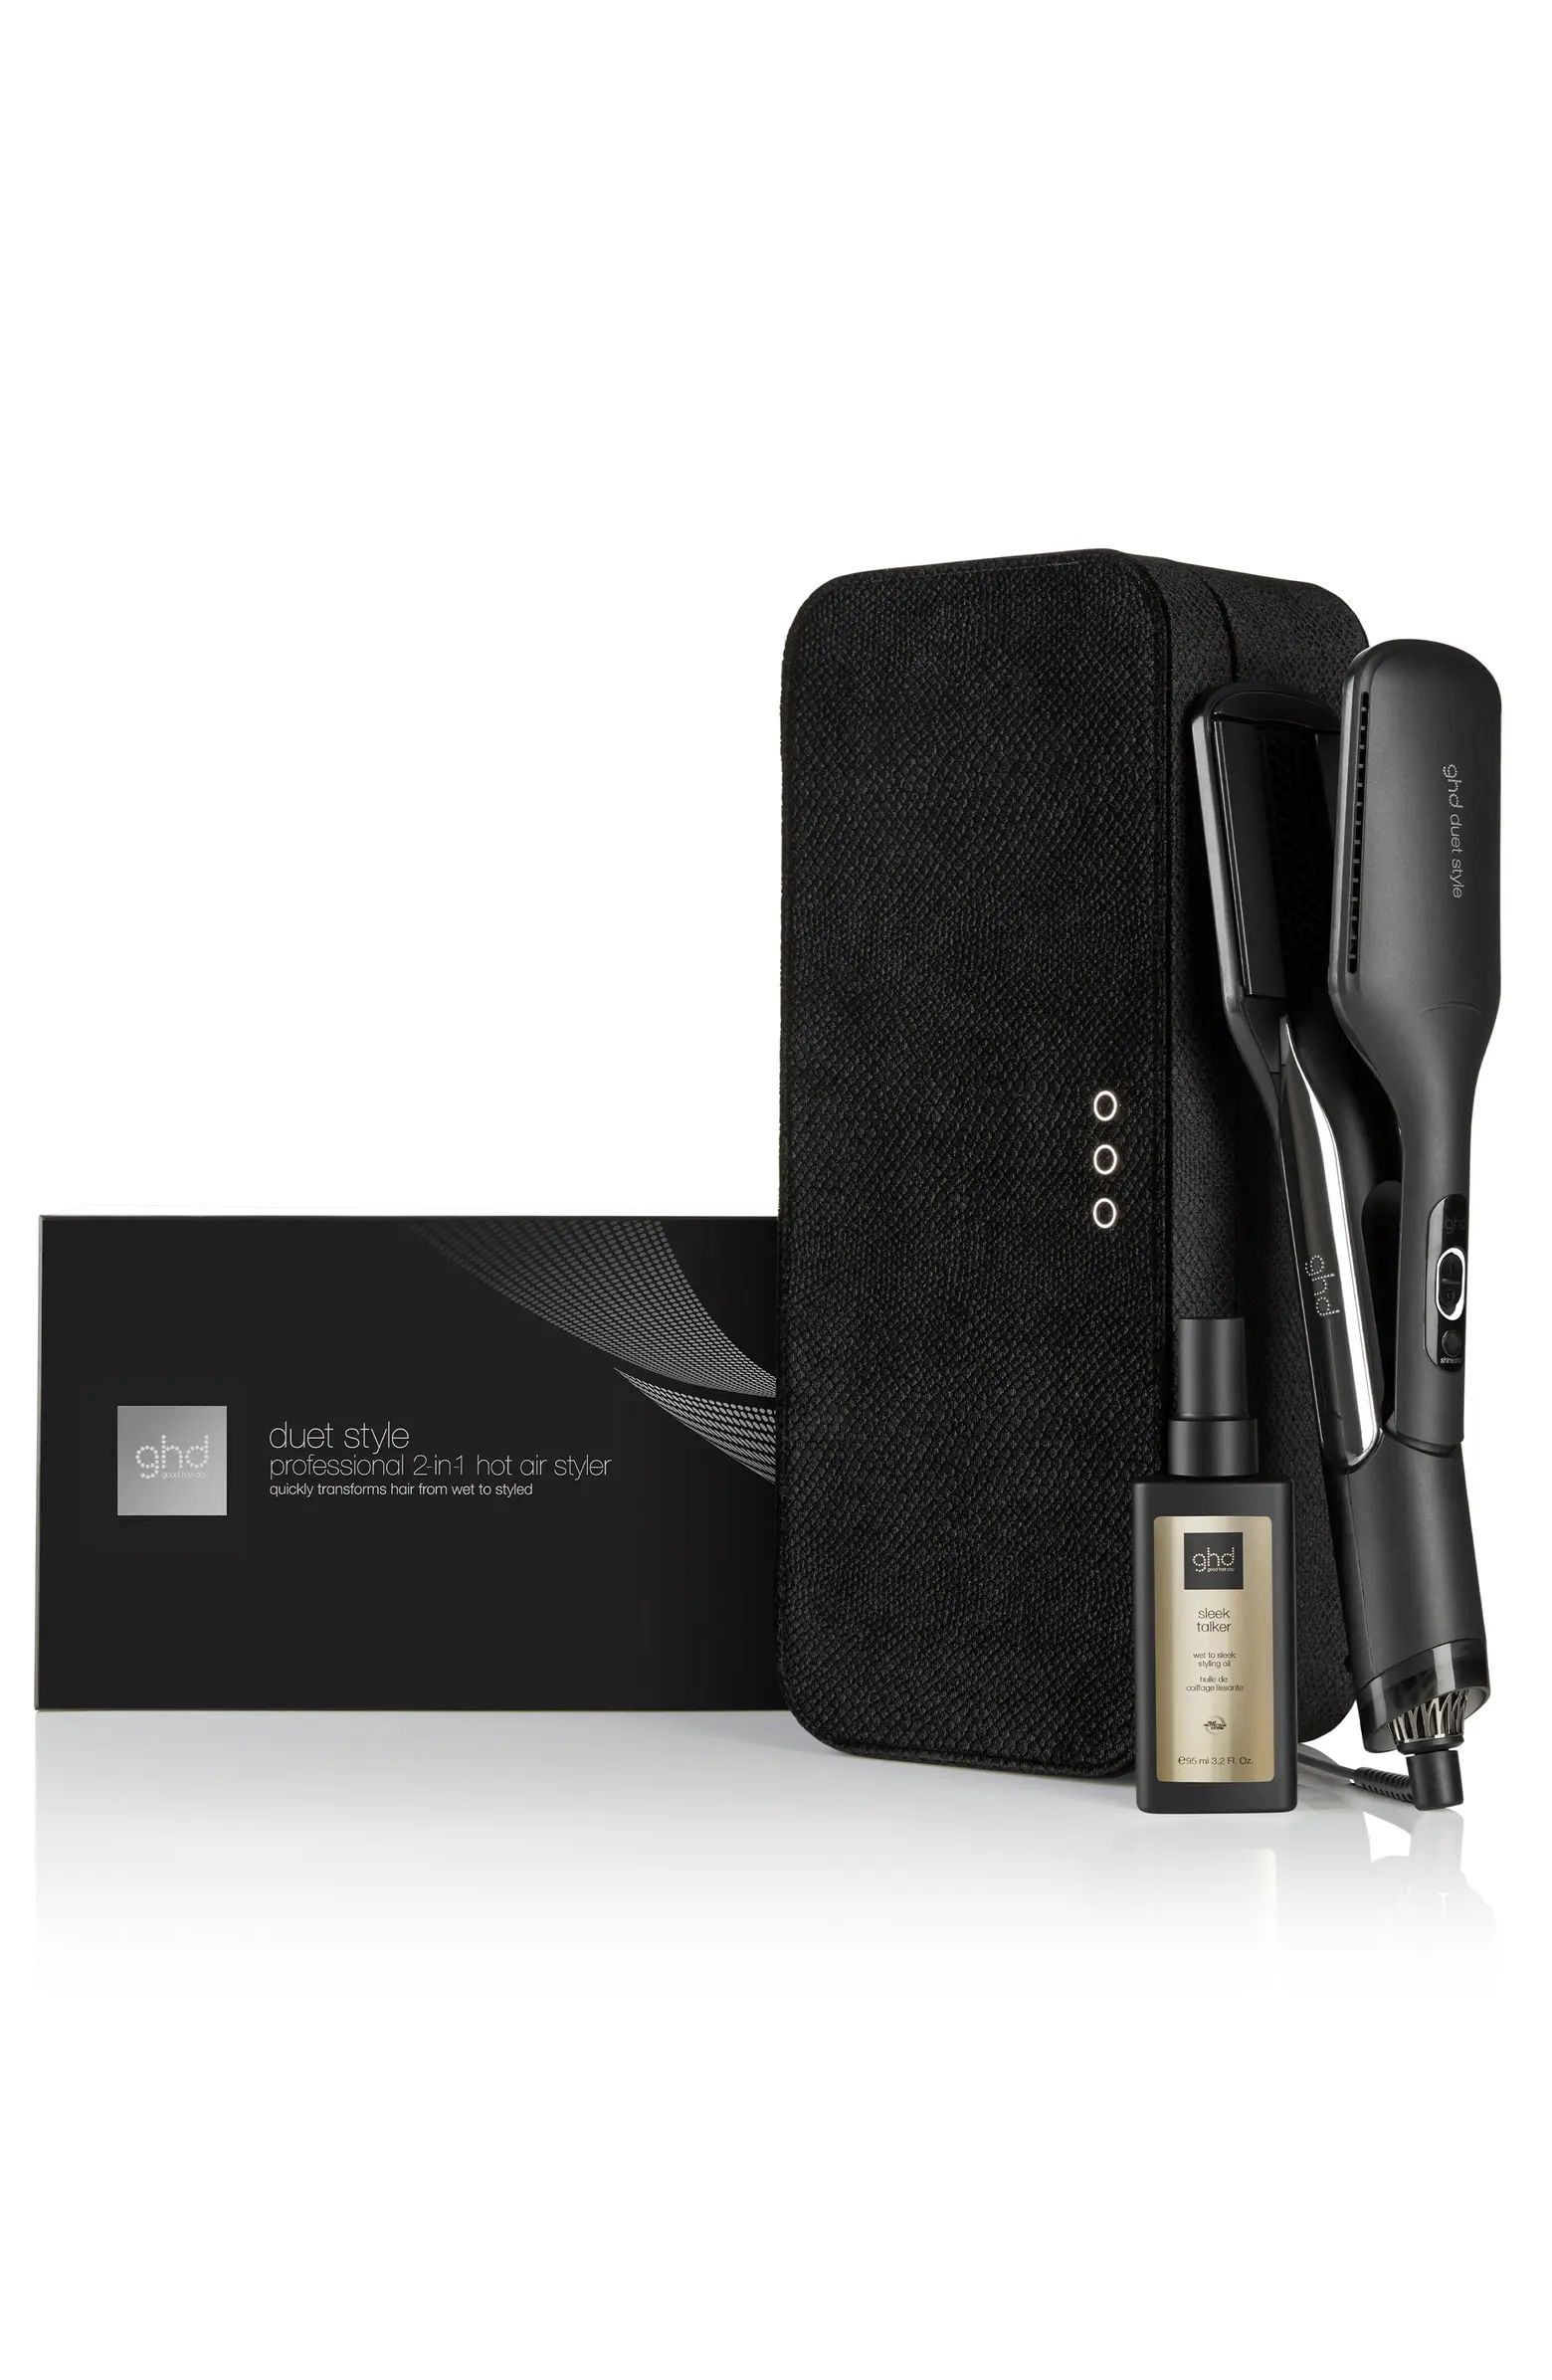 Duet 2-in-1 Hot Air Styler Gift Set (Limited Edition) $484 Value | Nordstrom